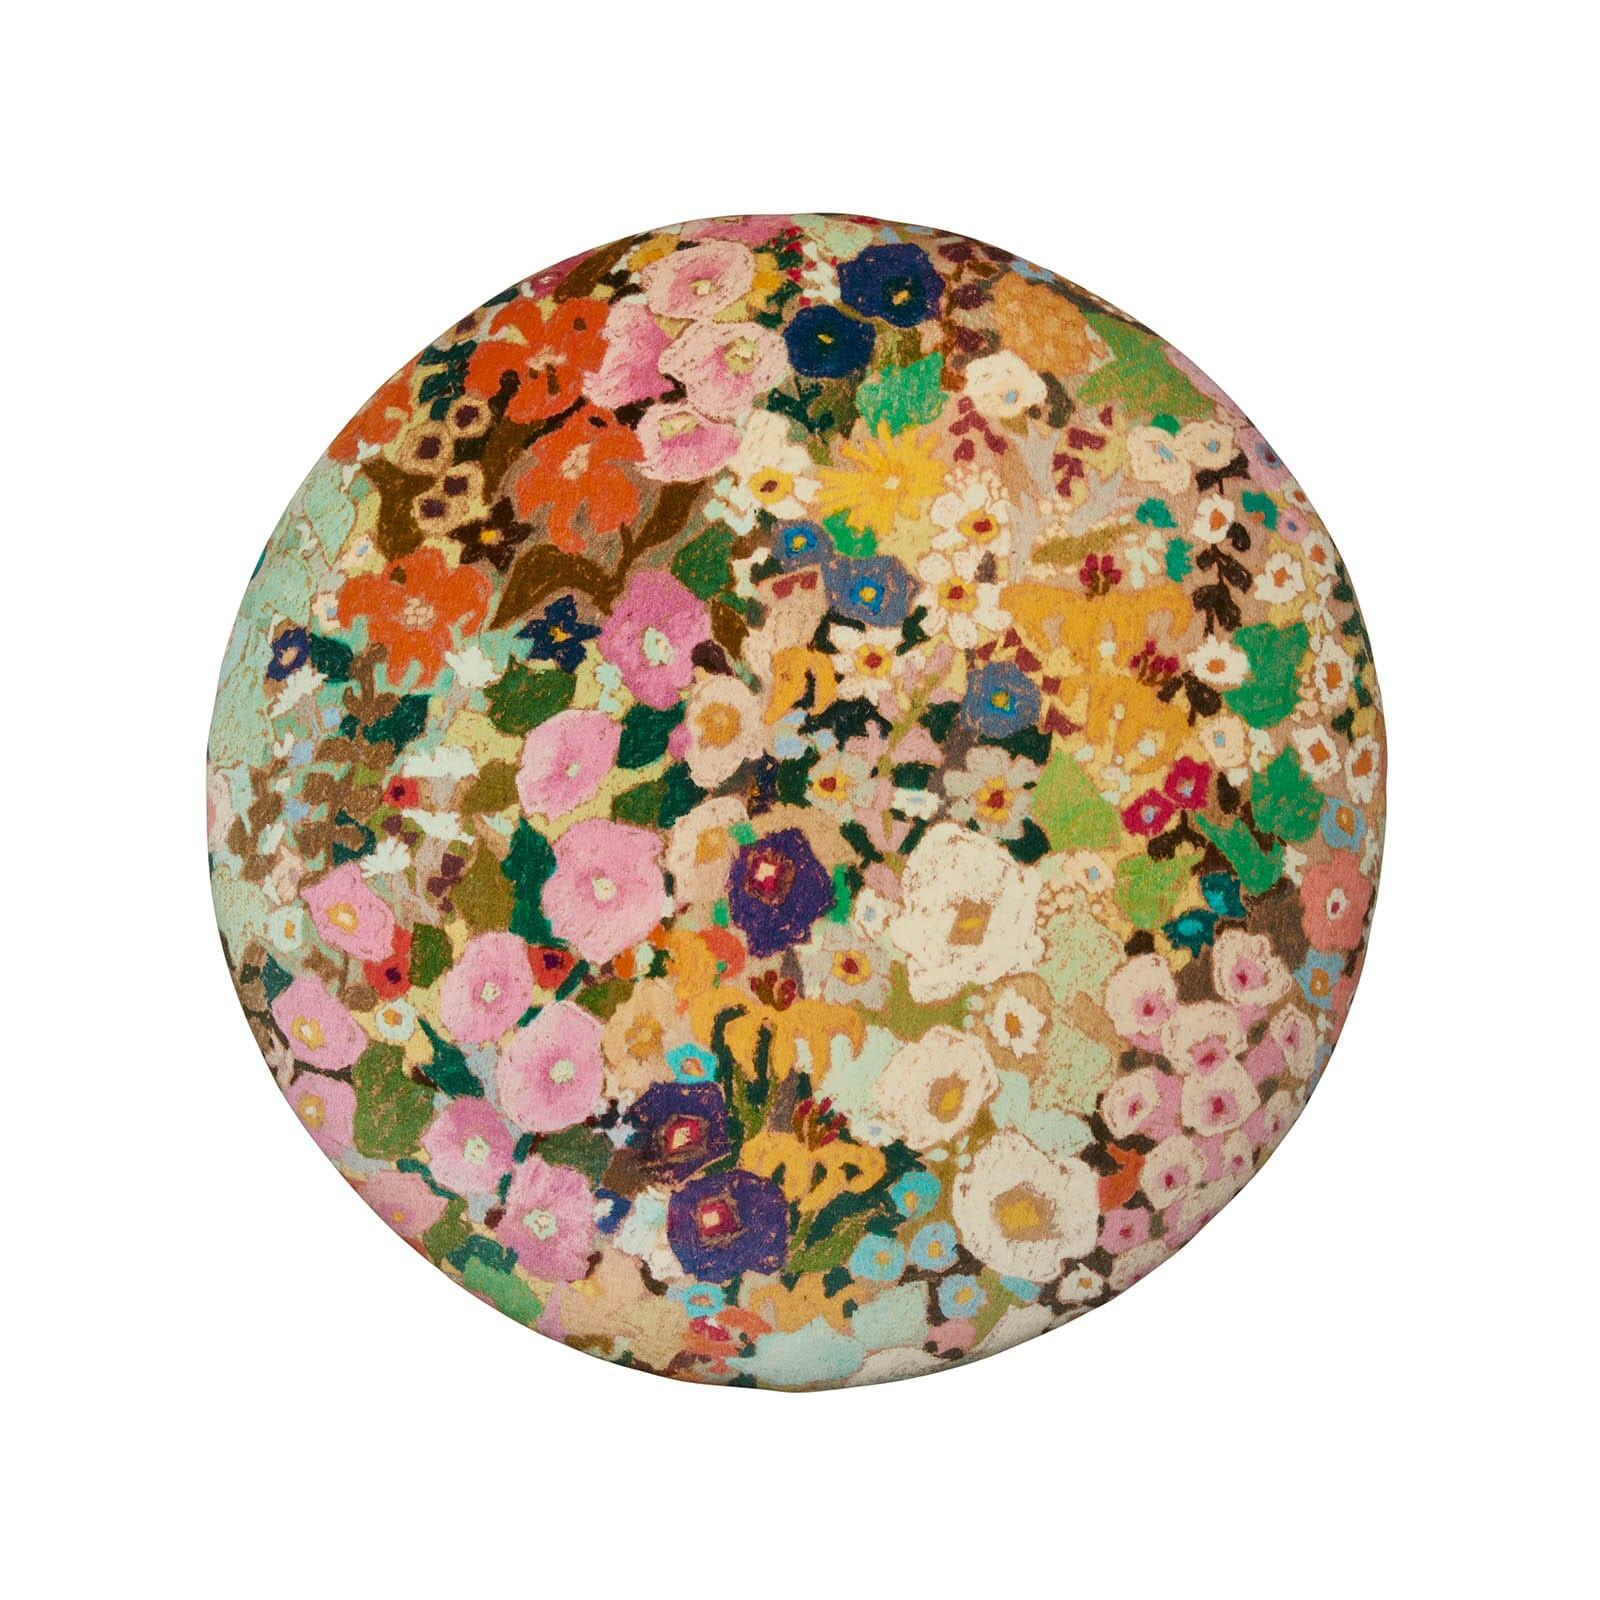 Reminiscent of the lush colour and luminous cheerfulness found in Gustav Klimt's paintings of flower gardens, HOLLYHOCKS was created especially for House of Hackney by American artist Kerry Simmons, based on her own work of the same name. Blossoming